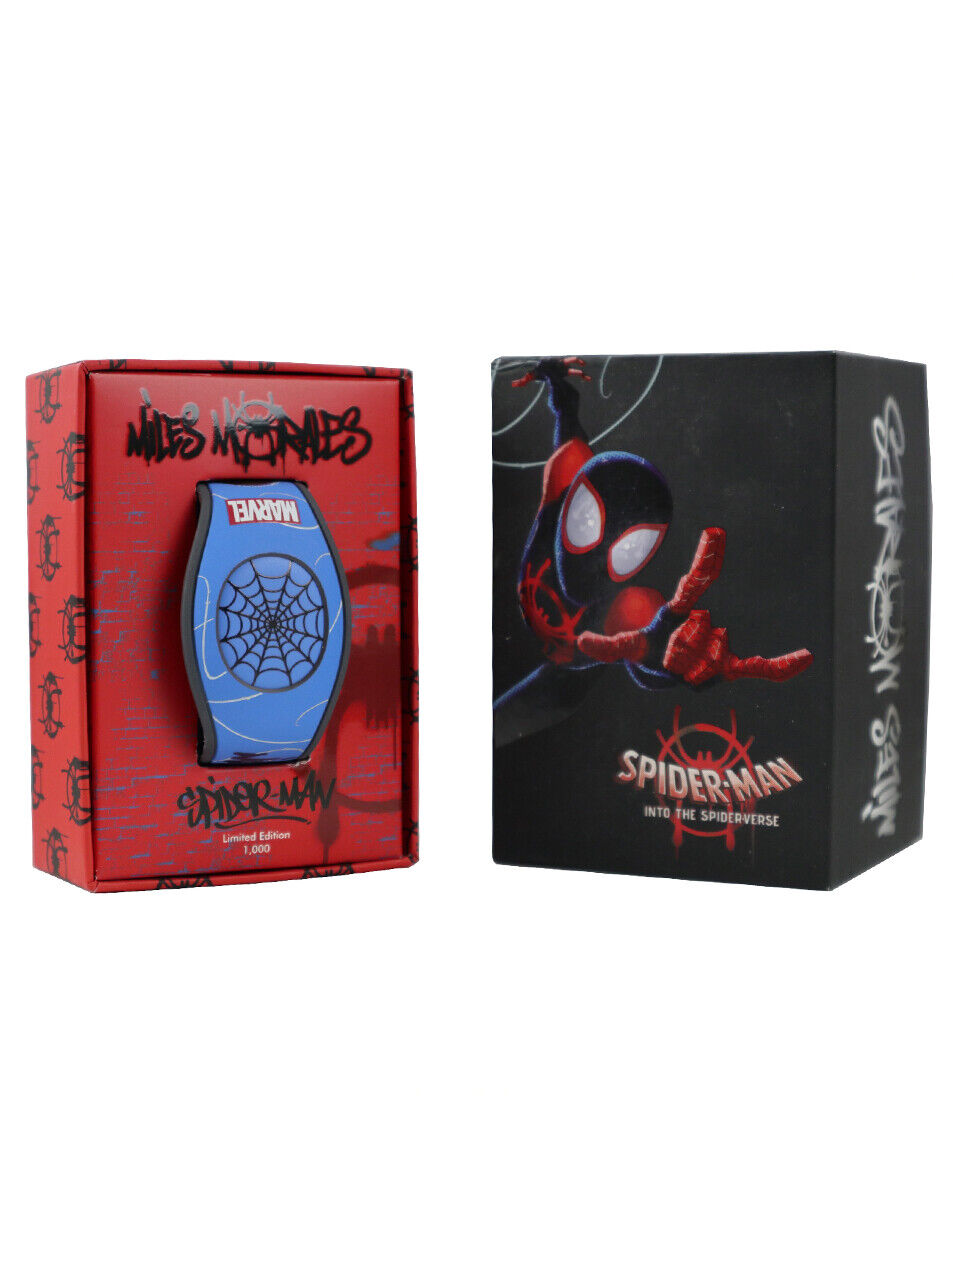 Spider-Man Into the Spider-Verse Limited Edition Disney MagicBand New In Box